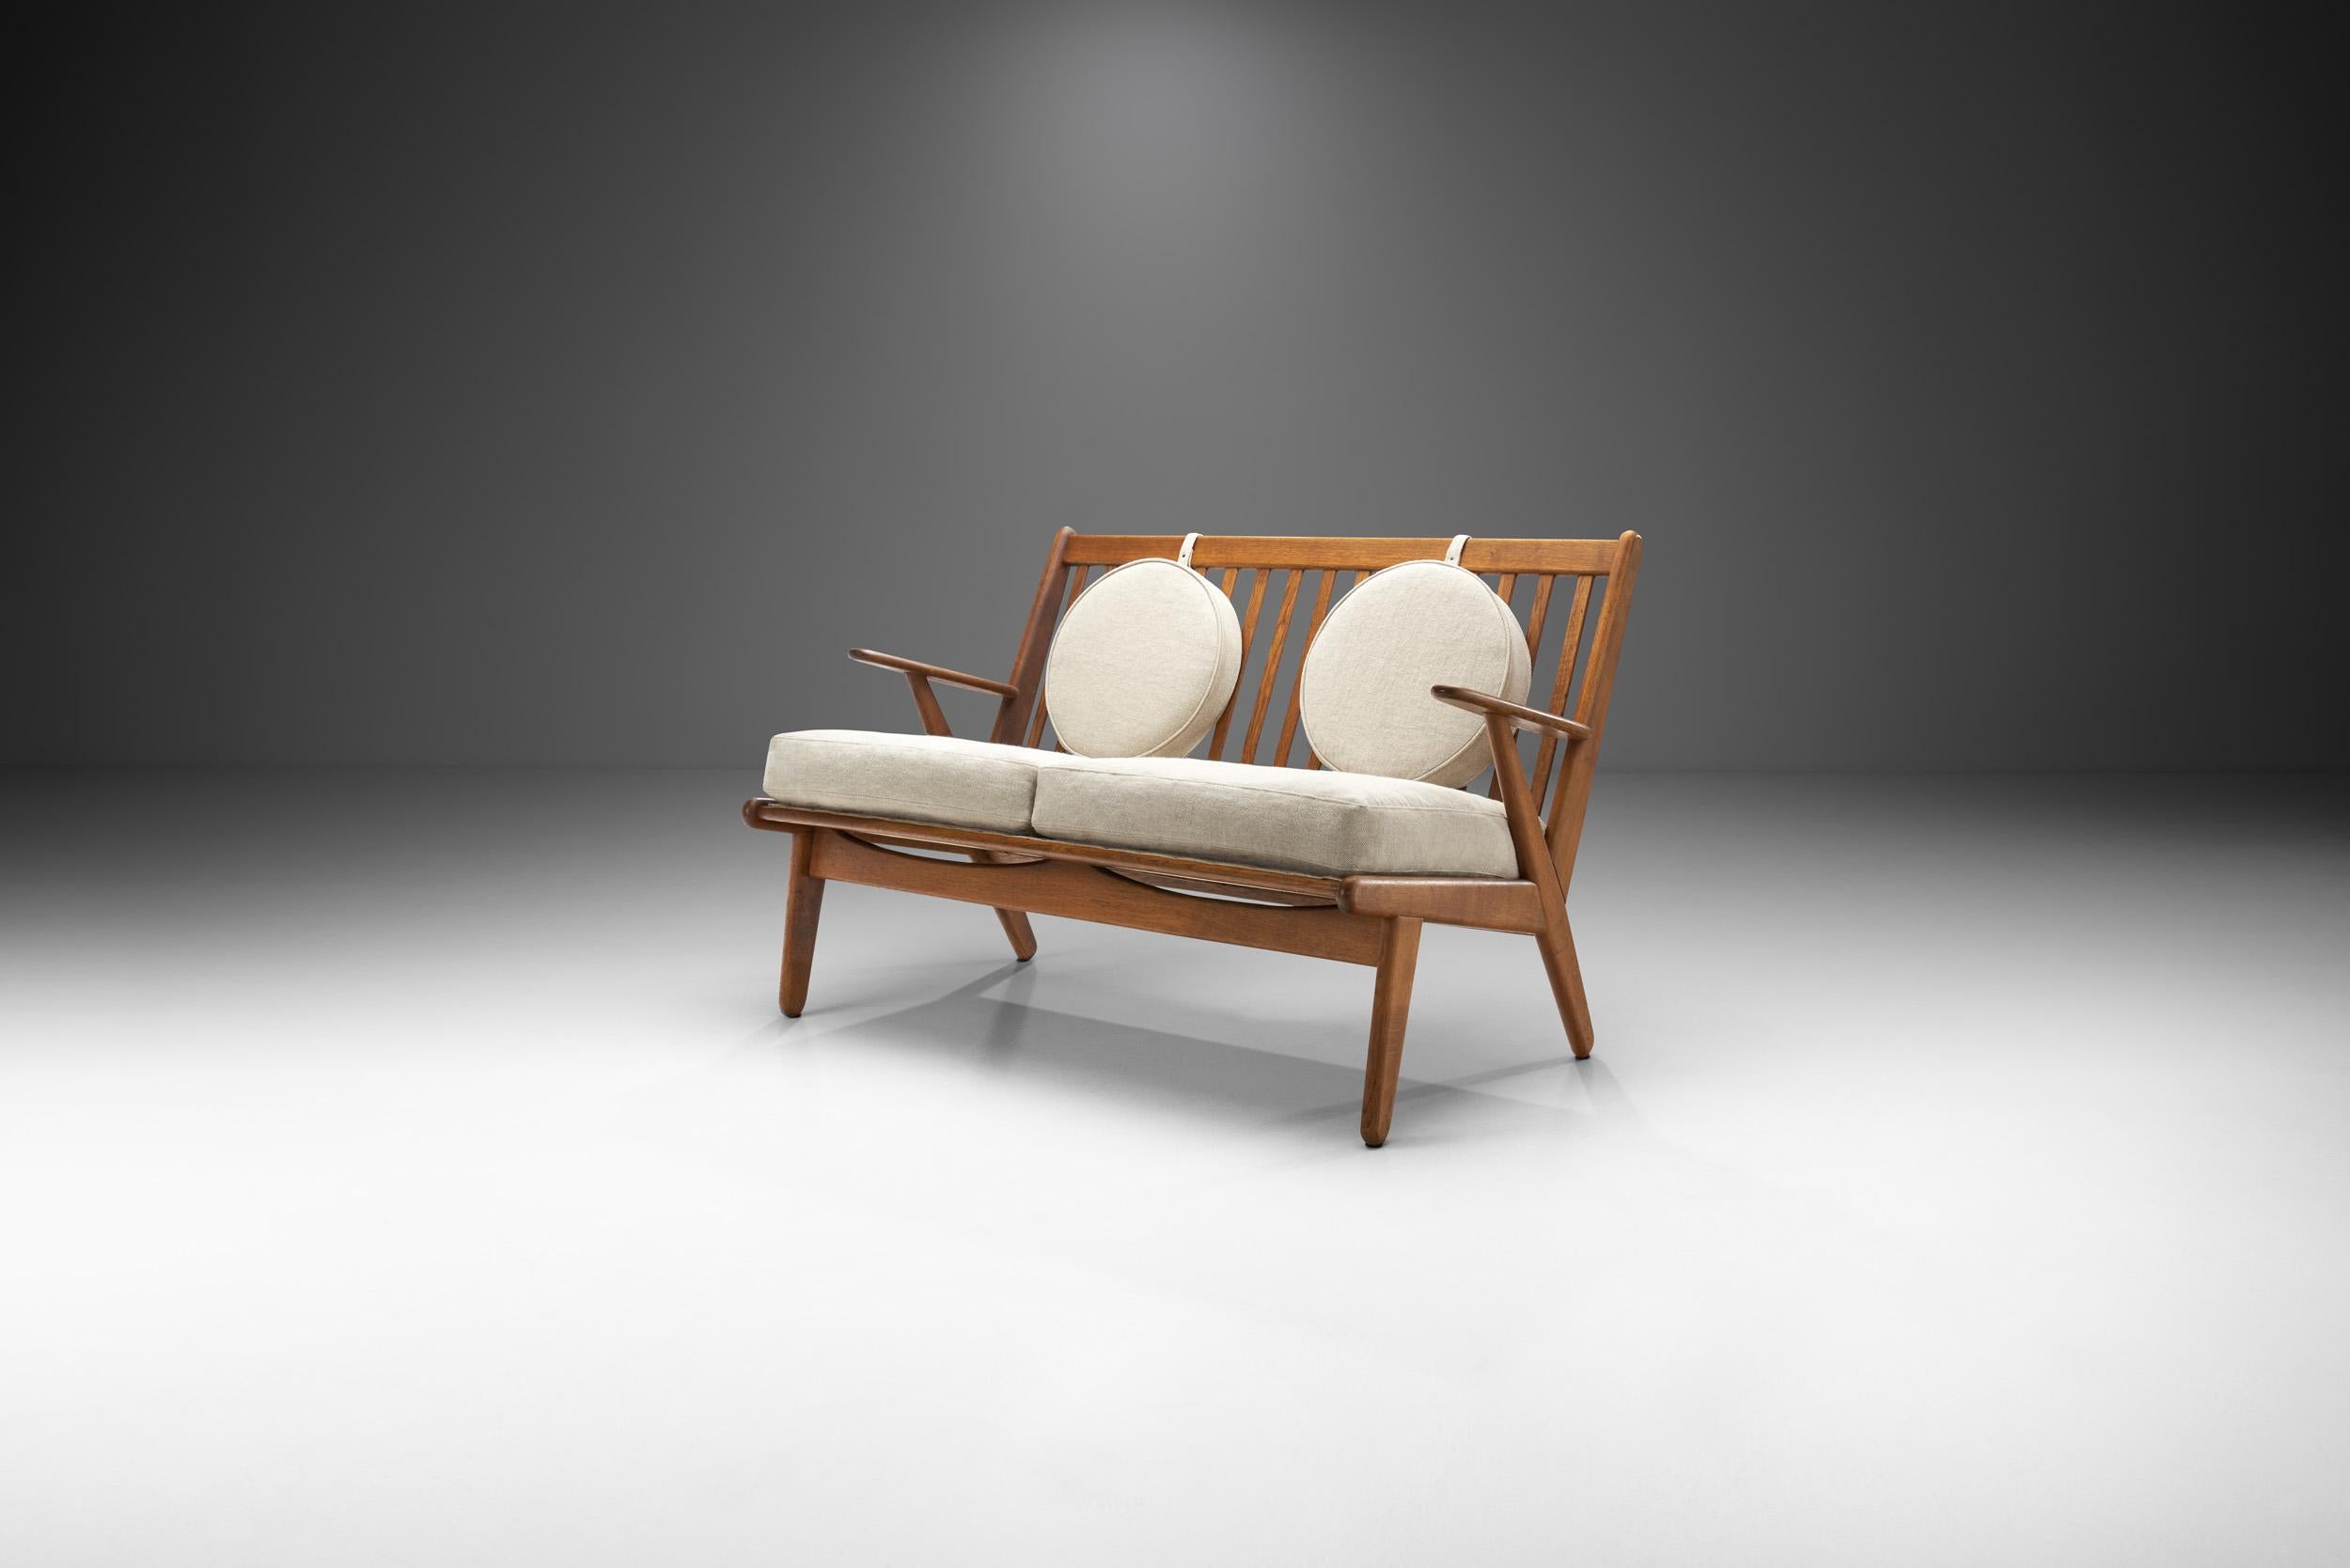 Mid-20th Century Danish Oak Two-Seater Bench with Pillows, Denmark ca. 1950s For Sale